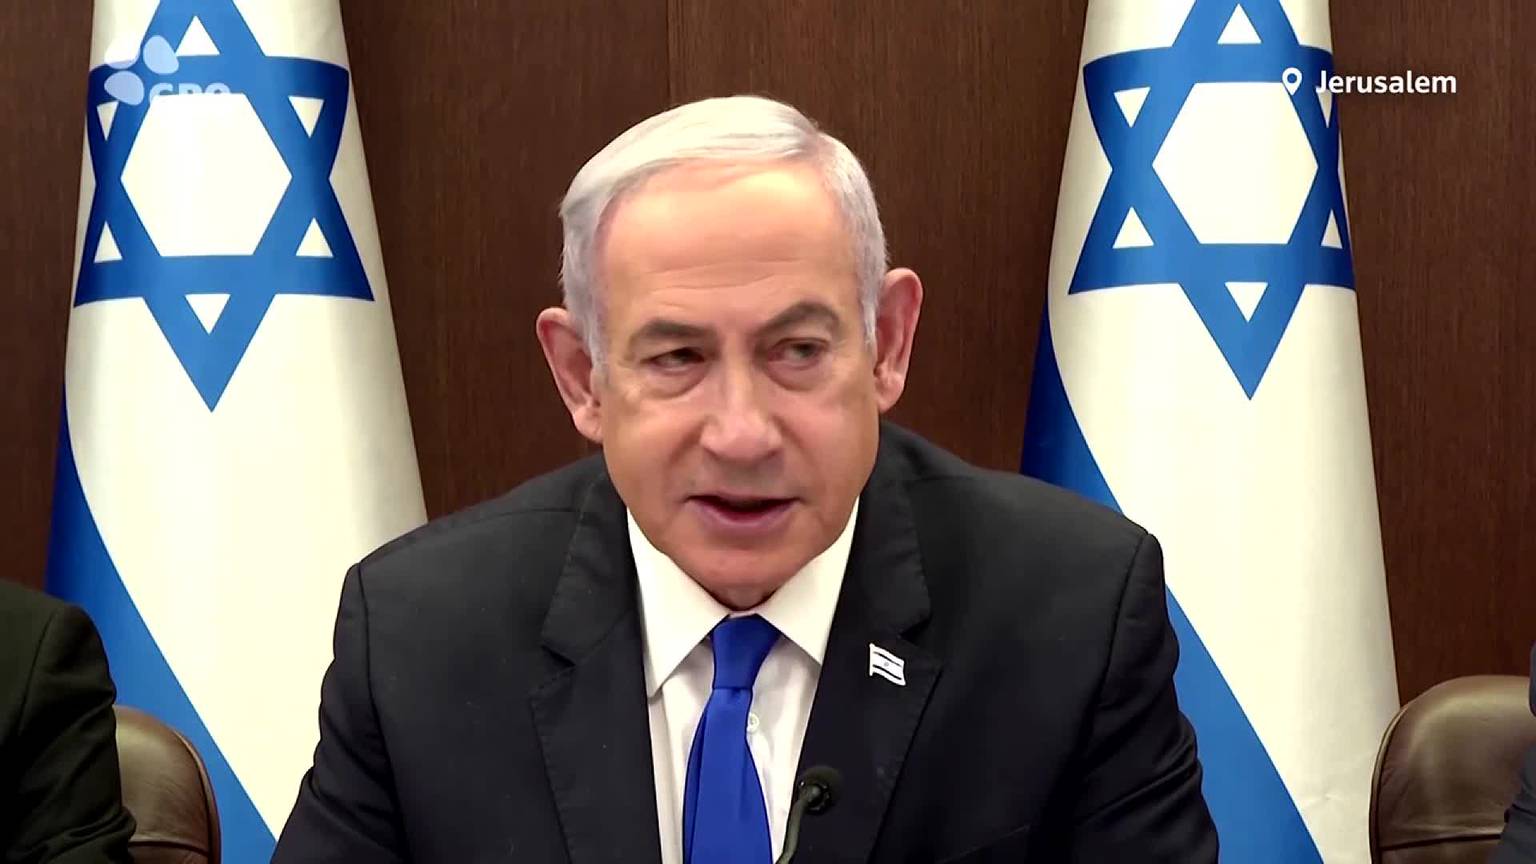 Video: Israel will do ‘everything necessary’ for defense, Netanyahu says [Video]